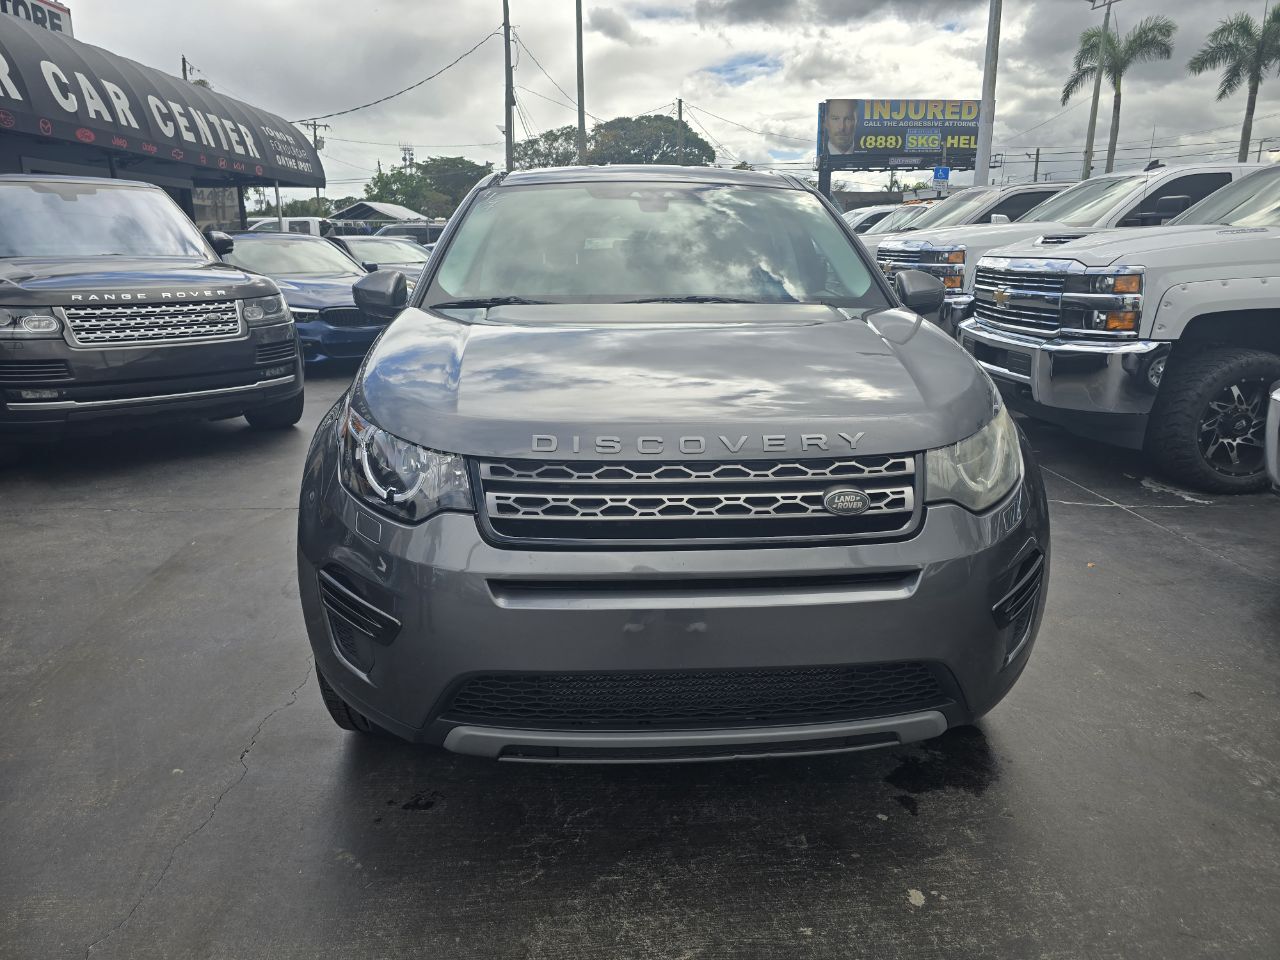 2016 LAND ROVER Discovery Sport SUV / Crossover - $14,900